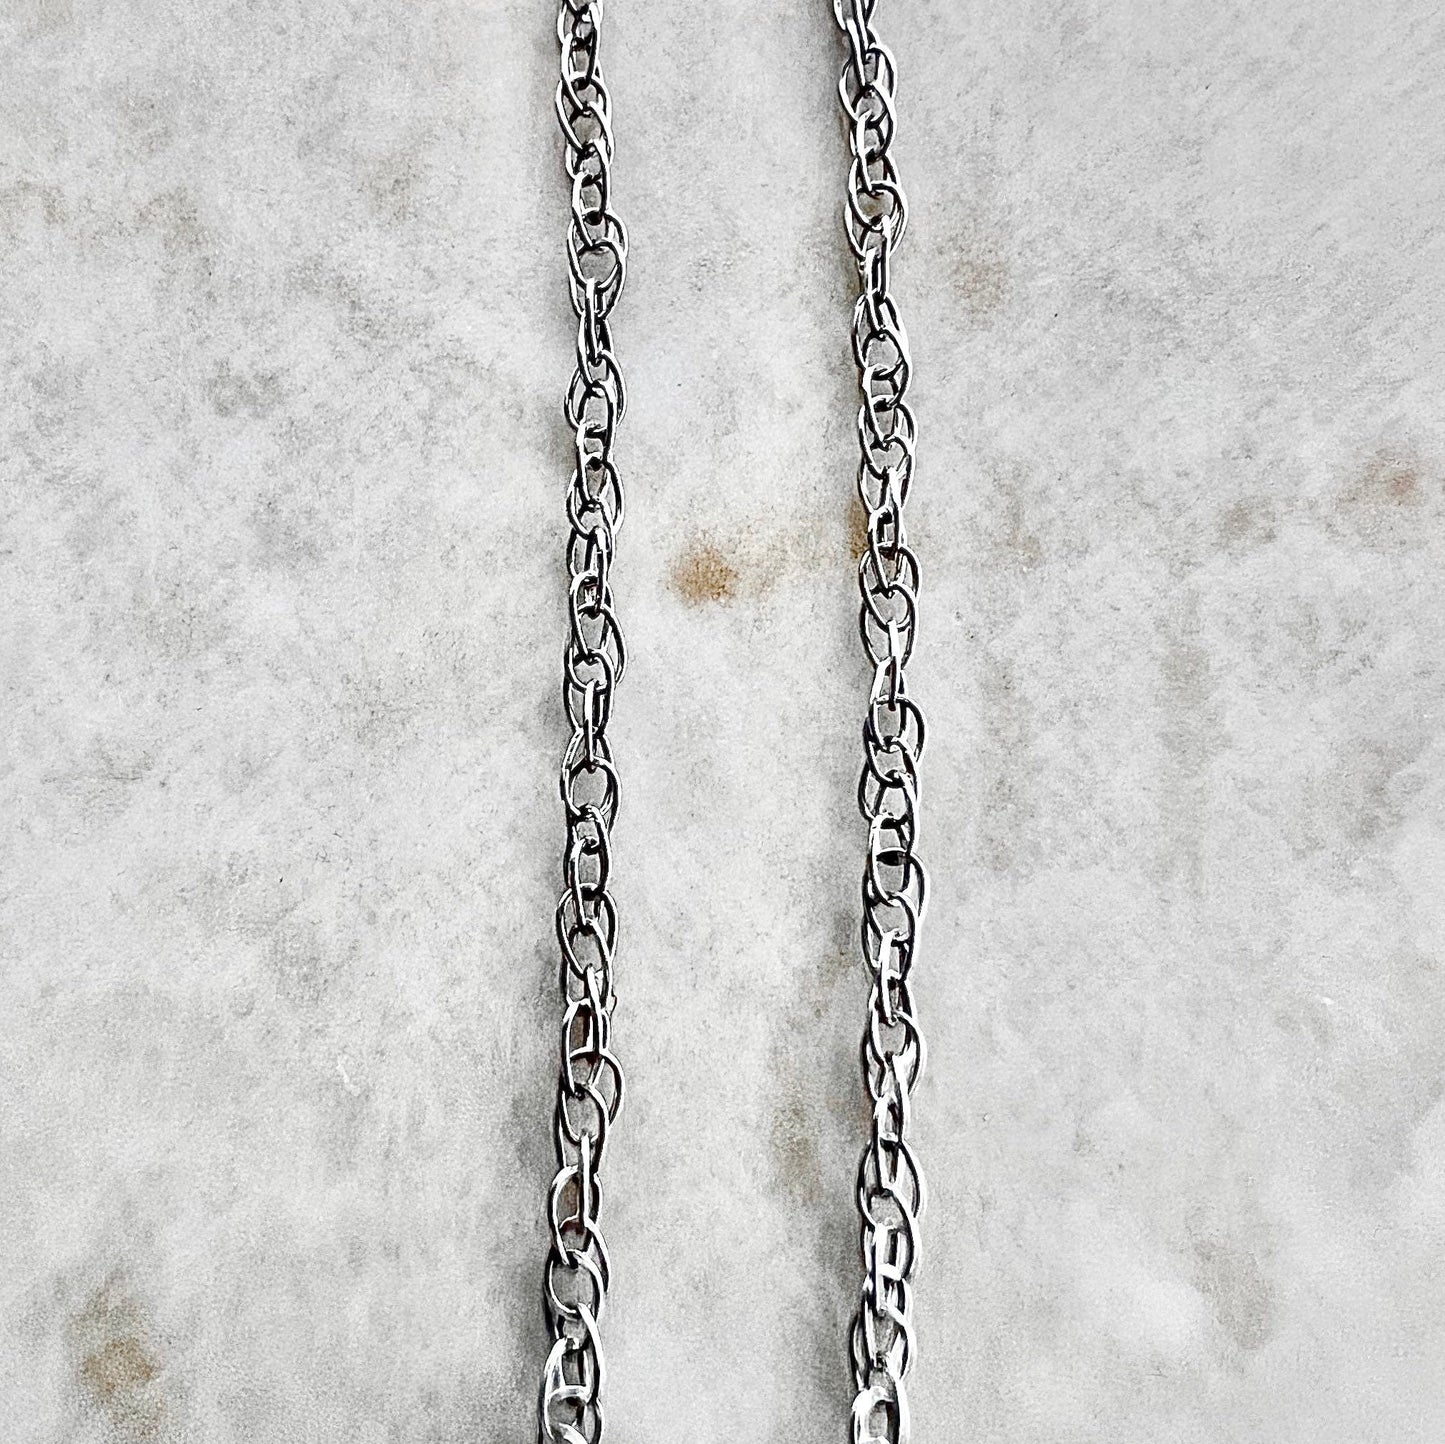 Vintage 14K White Gold Rope Chain - 16.5” Gold Chain - White Gold Pendant Necklace - Birthday Gift For Her - Holiday Gift - Jewelry Sale